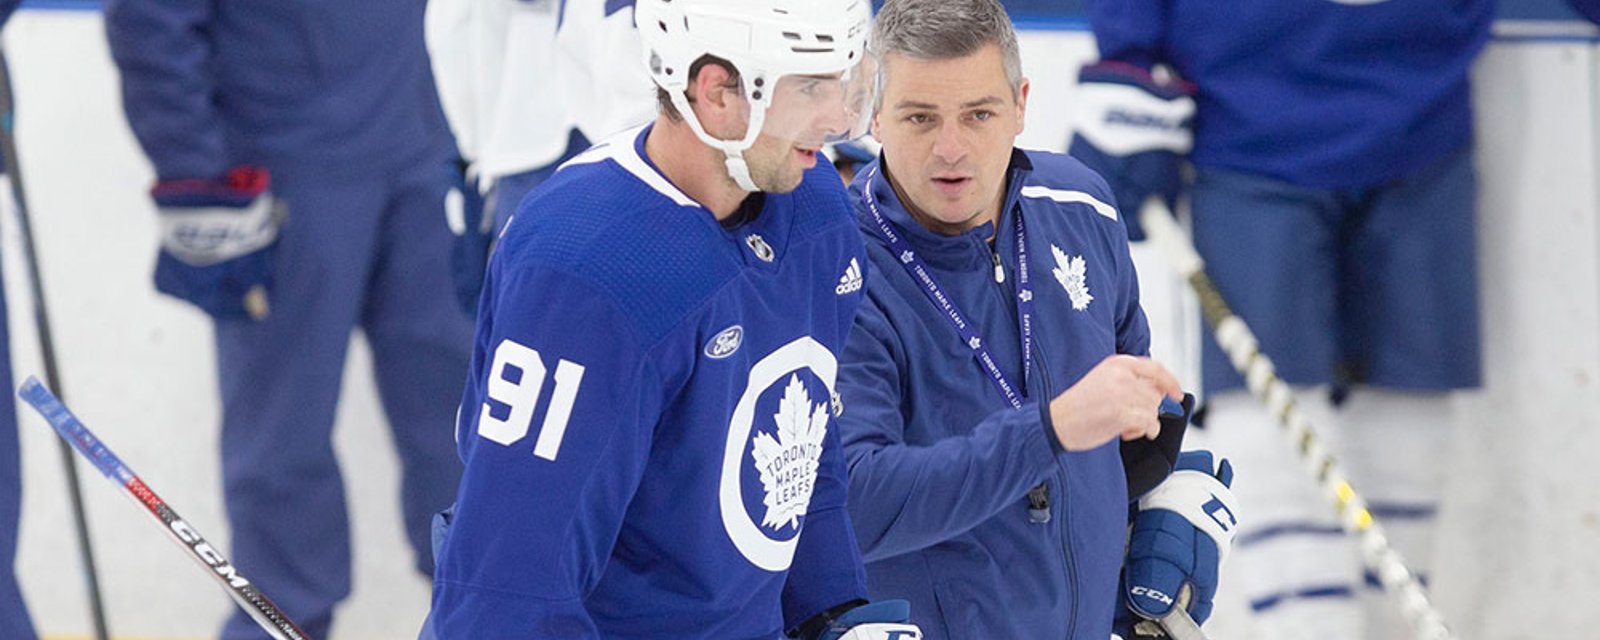 More changes at Leafs practice under new coach Sheldon Keefe